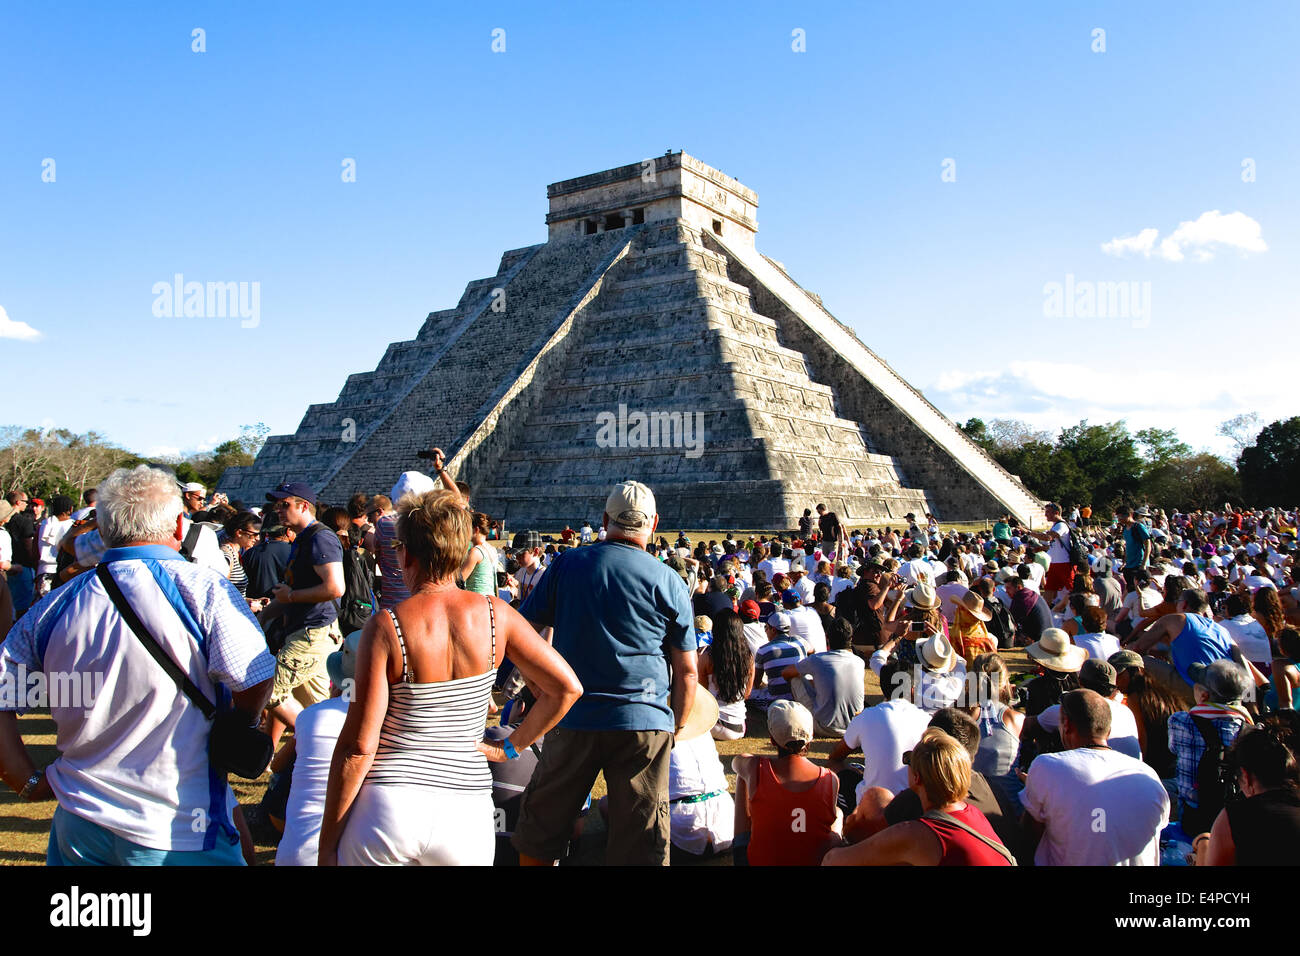 People from all over the world await the spring equinox with its famous shadowplay at the Mayan Kukulkan pyramid at Chichen Itza Stock Photo